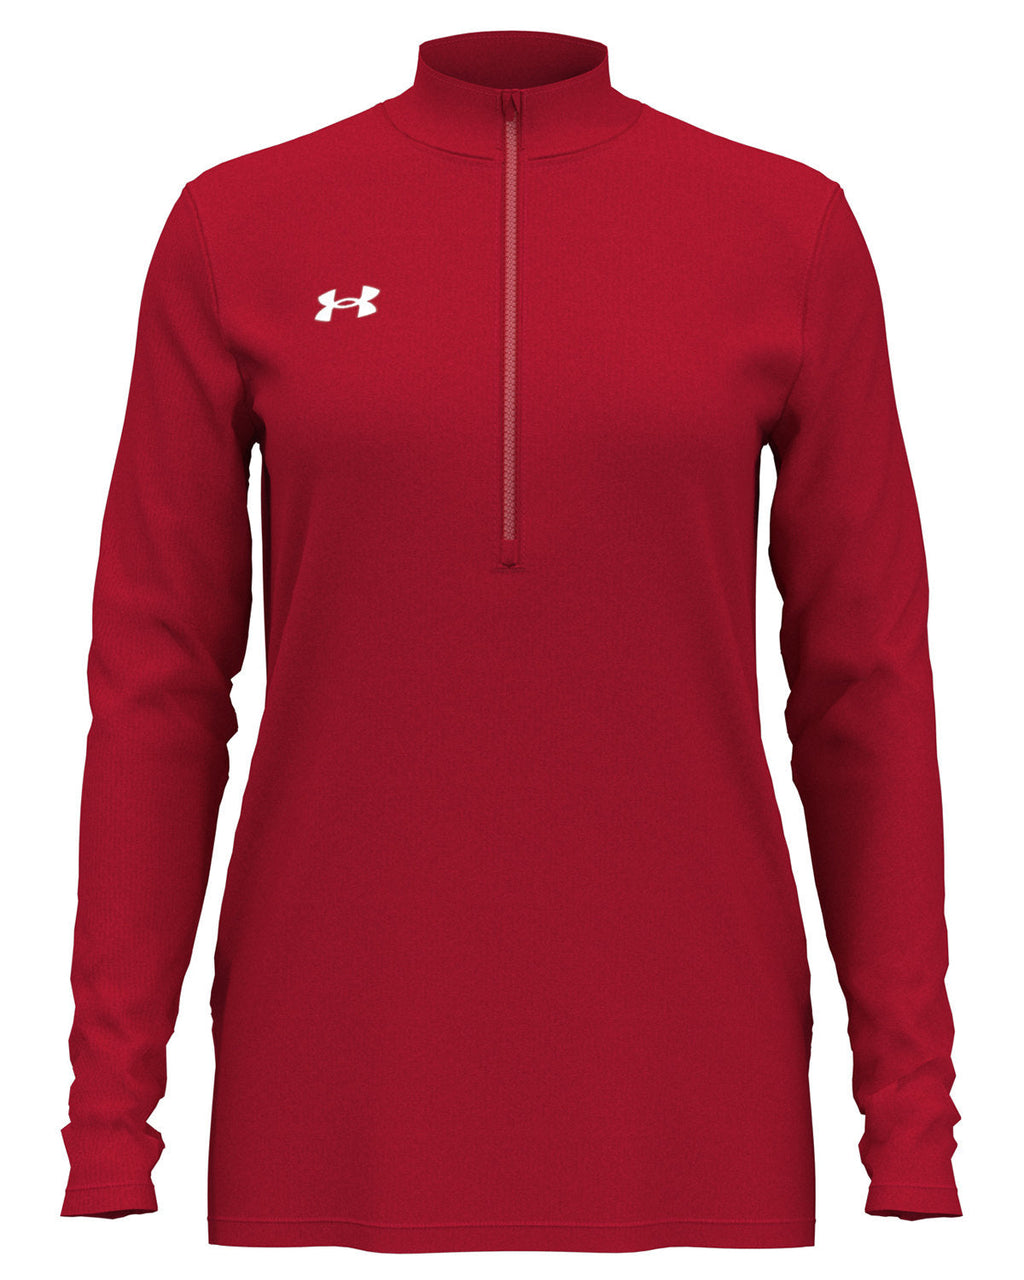 Under Armour Ladies Team Tech Half-Zip with Custom Embroidery